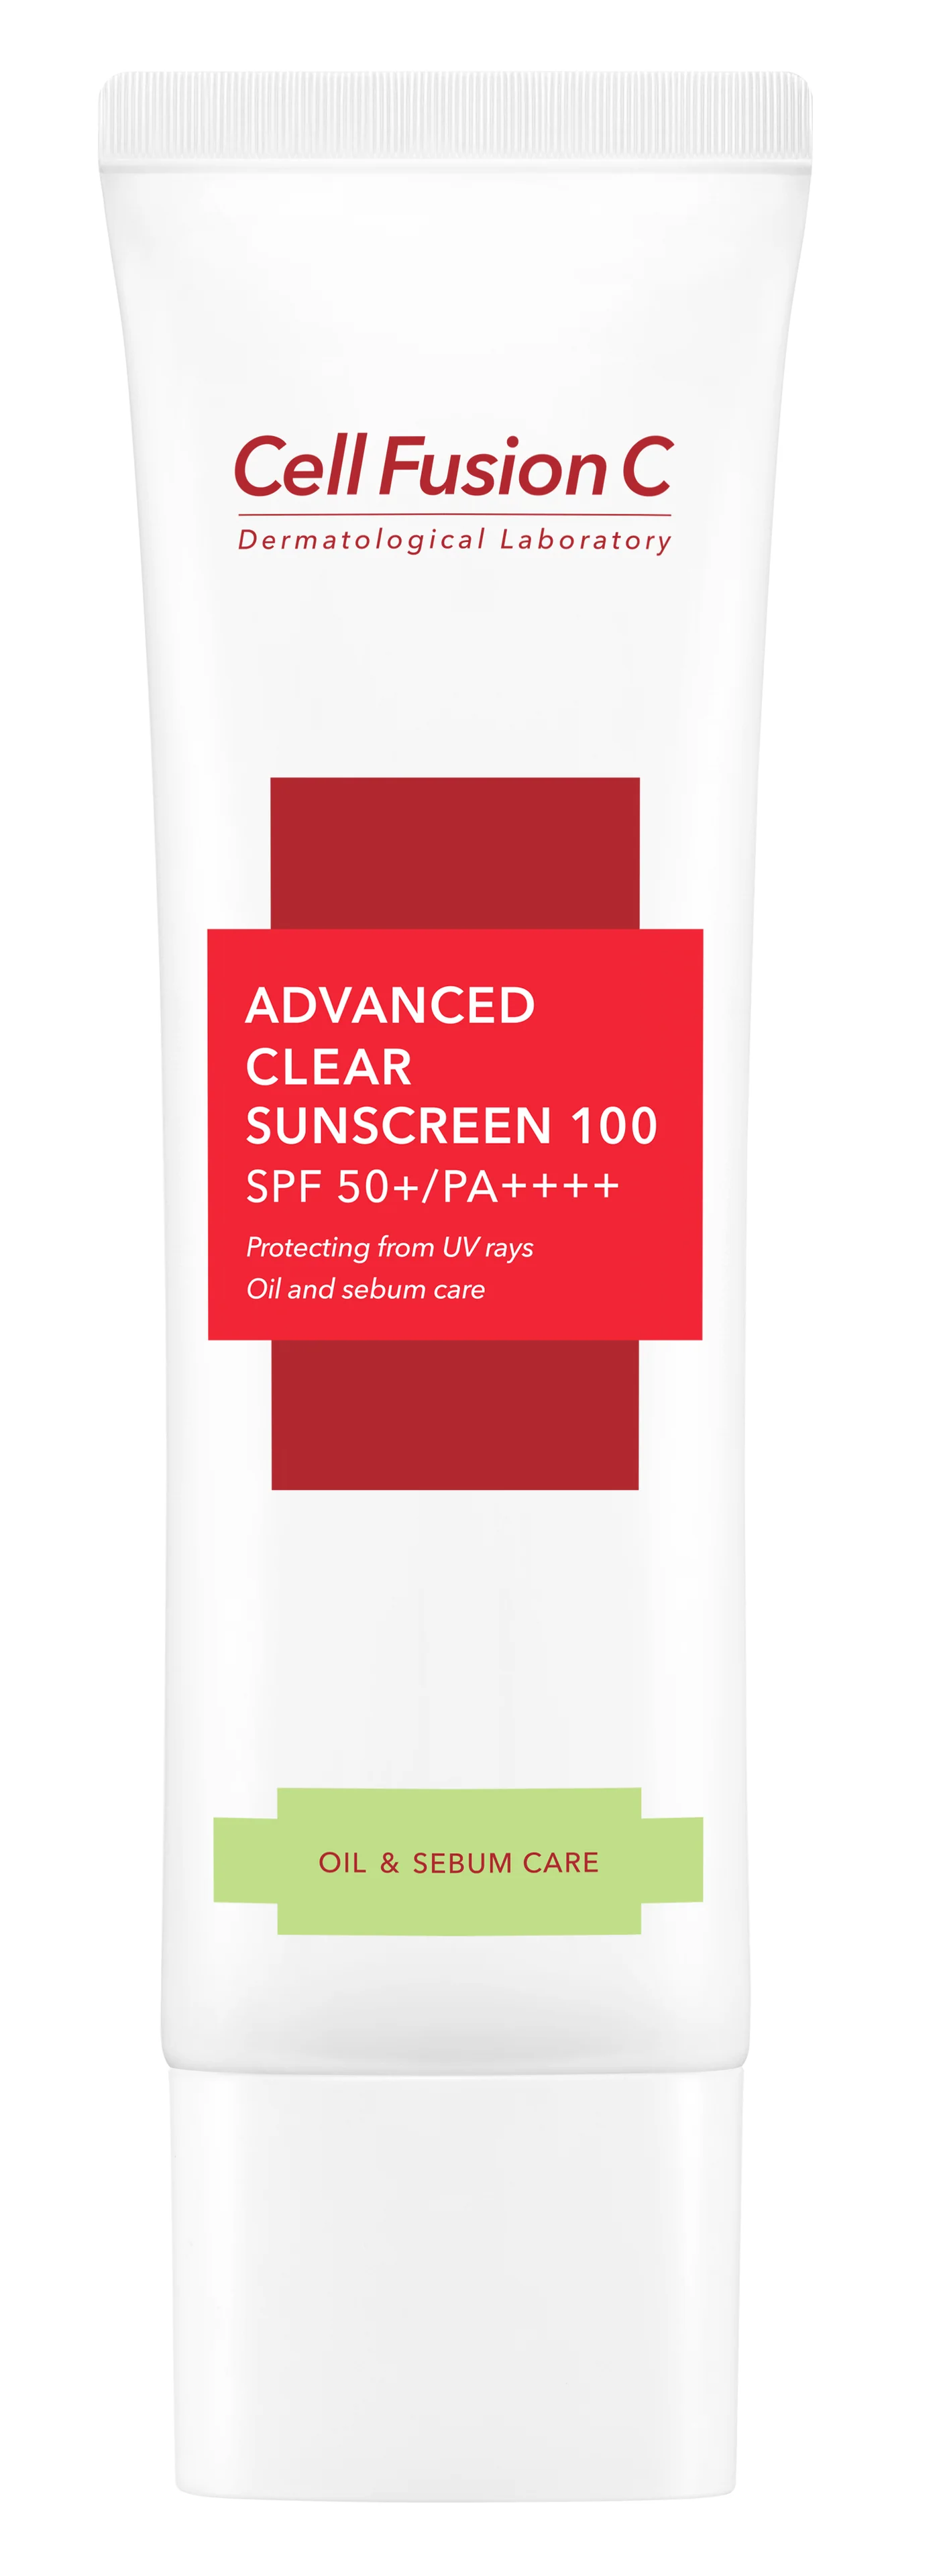 [Cell Fusion C] Advanced Clear Sunscreen SPF 50+ / PA++++